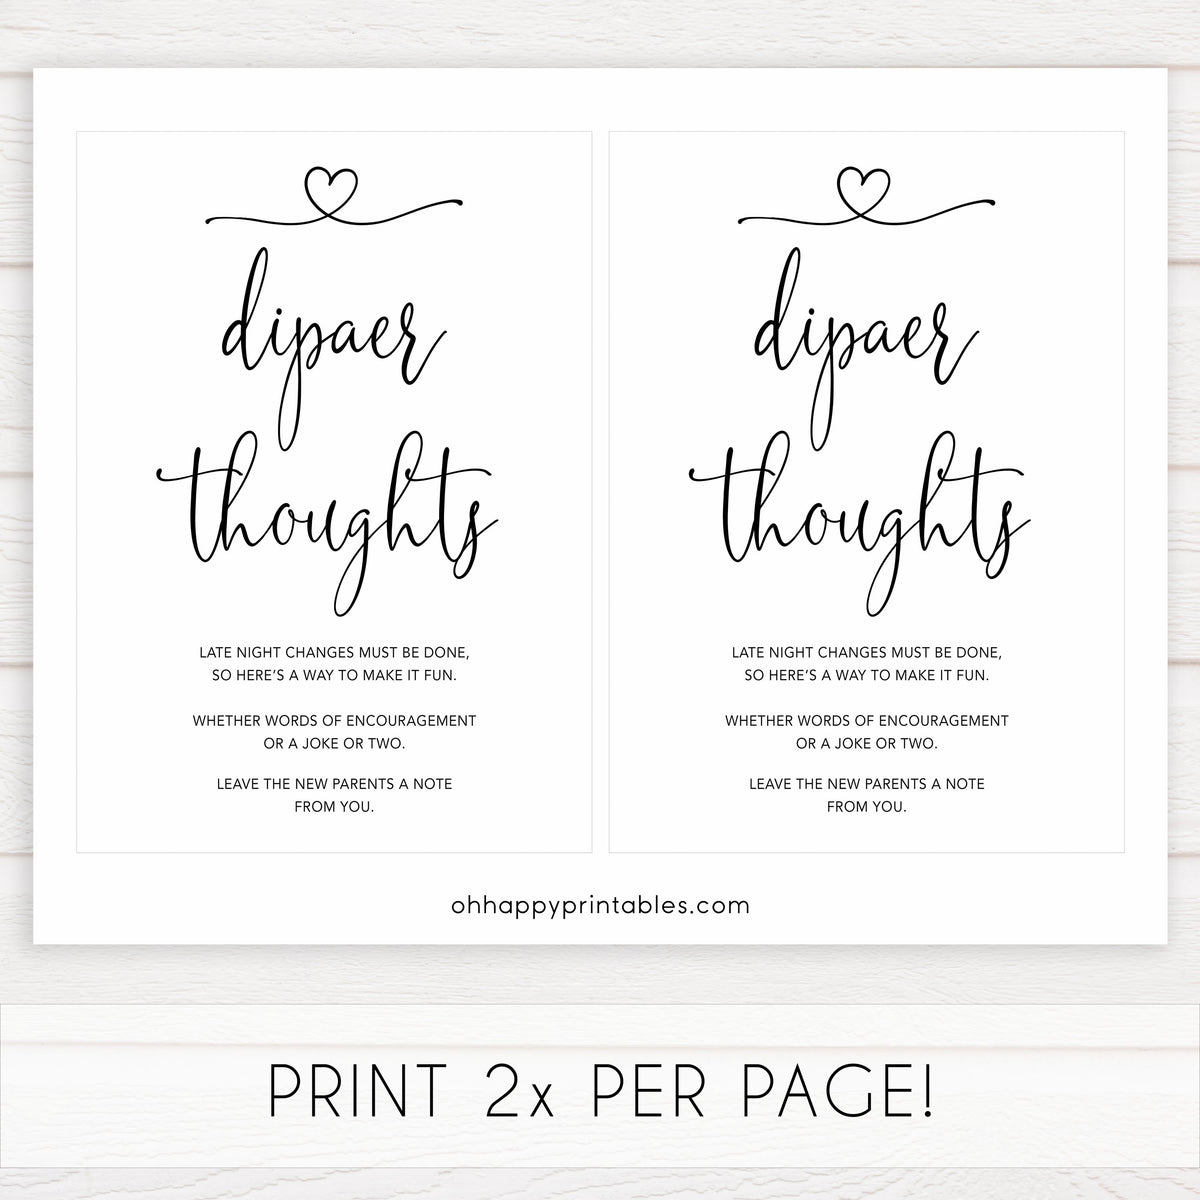 diaper-thoughts-minimalist-printable-baby-shower-games